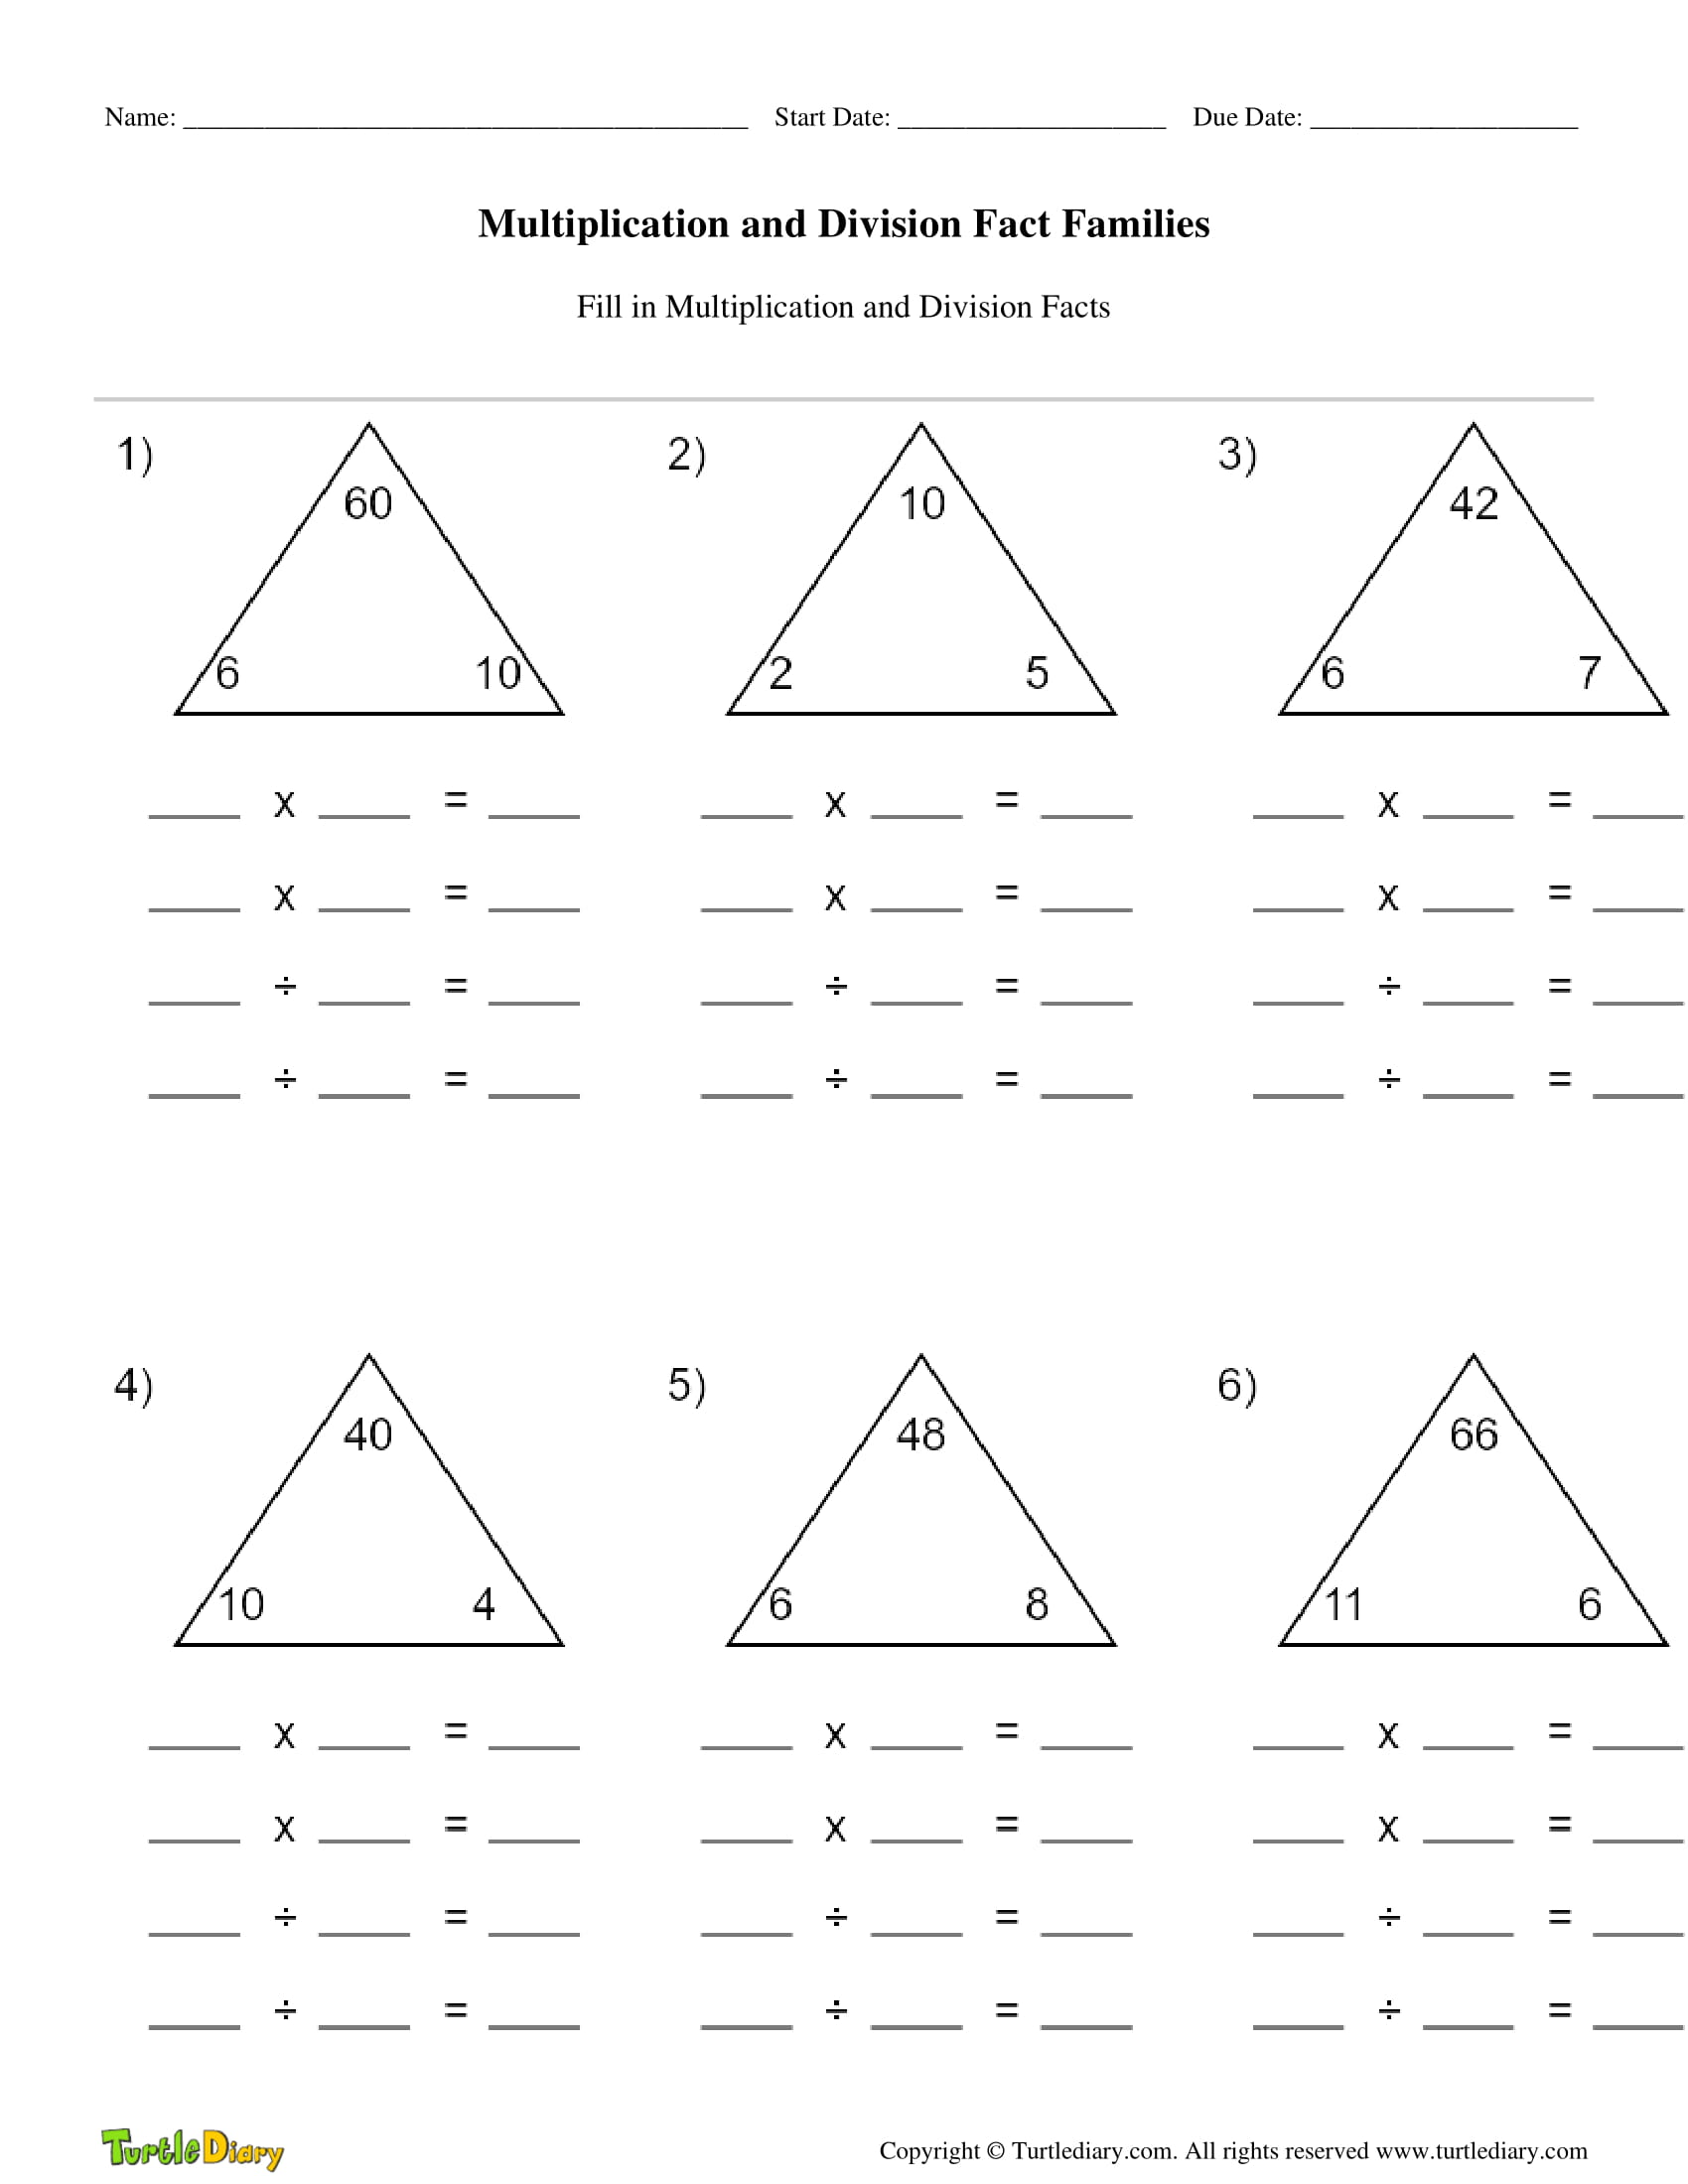 free-printable-multiplication-division-fact-family-worksheets